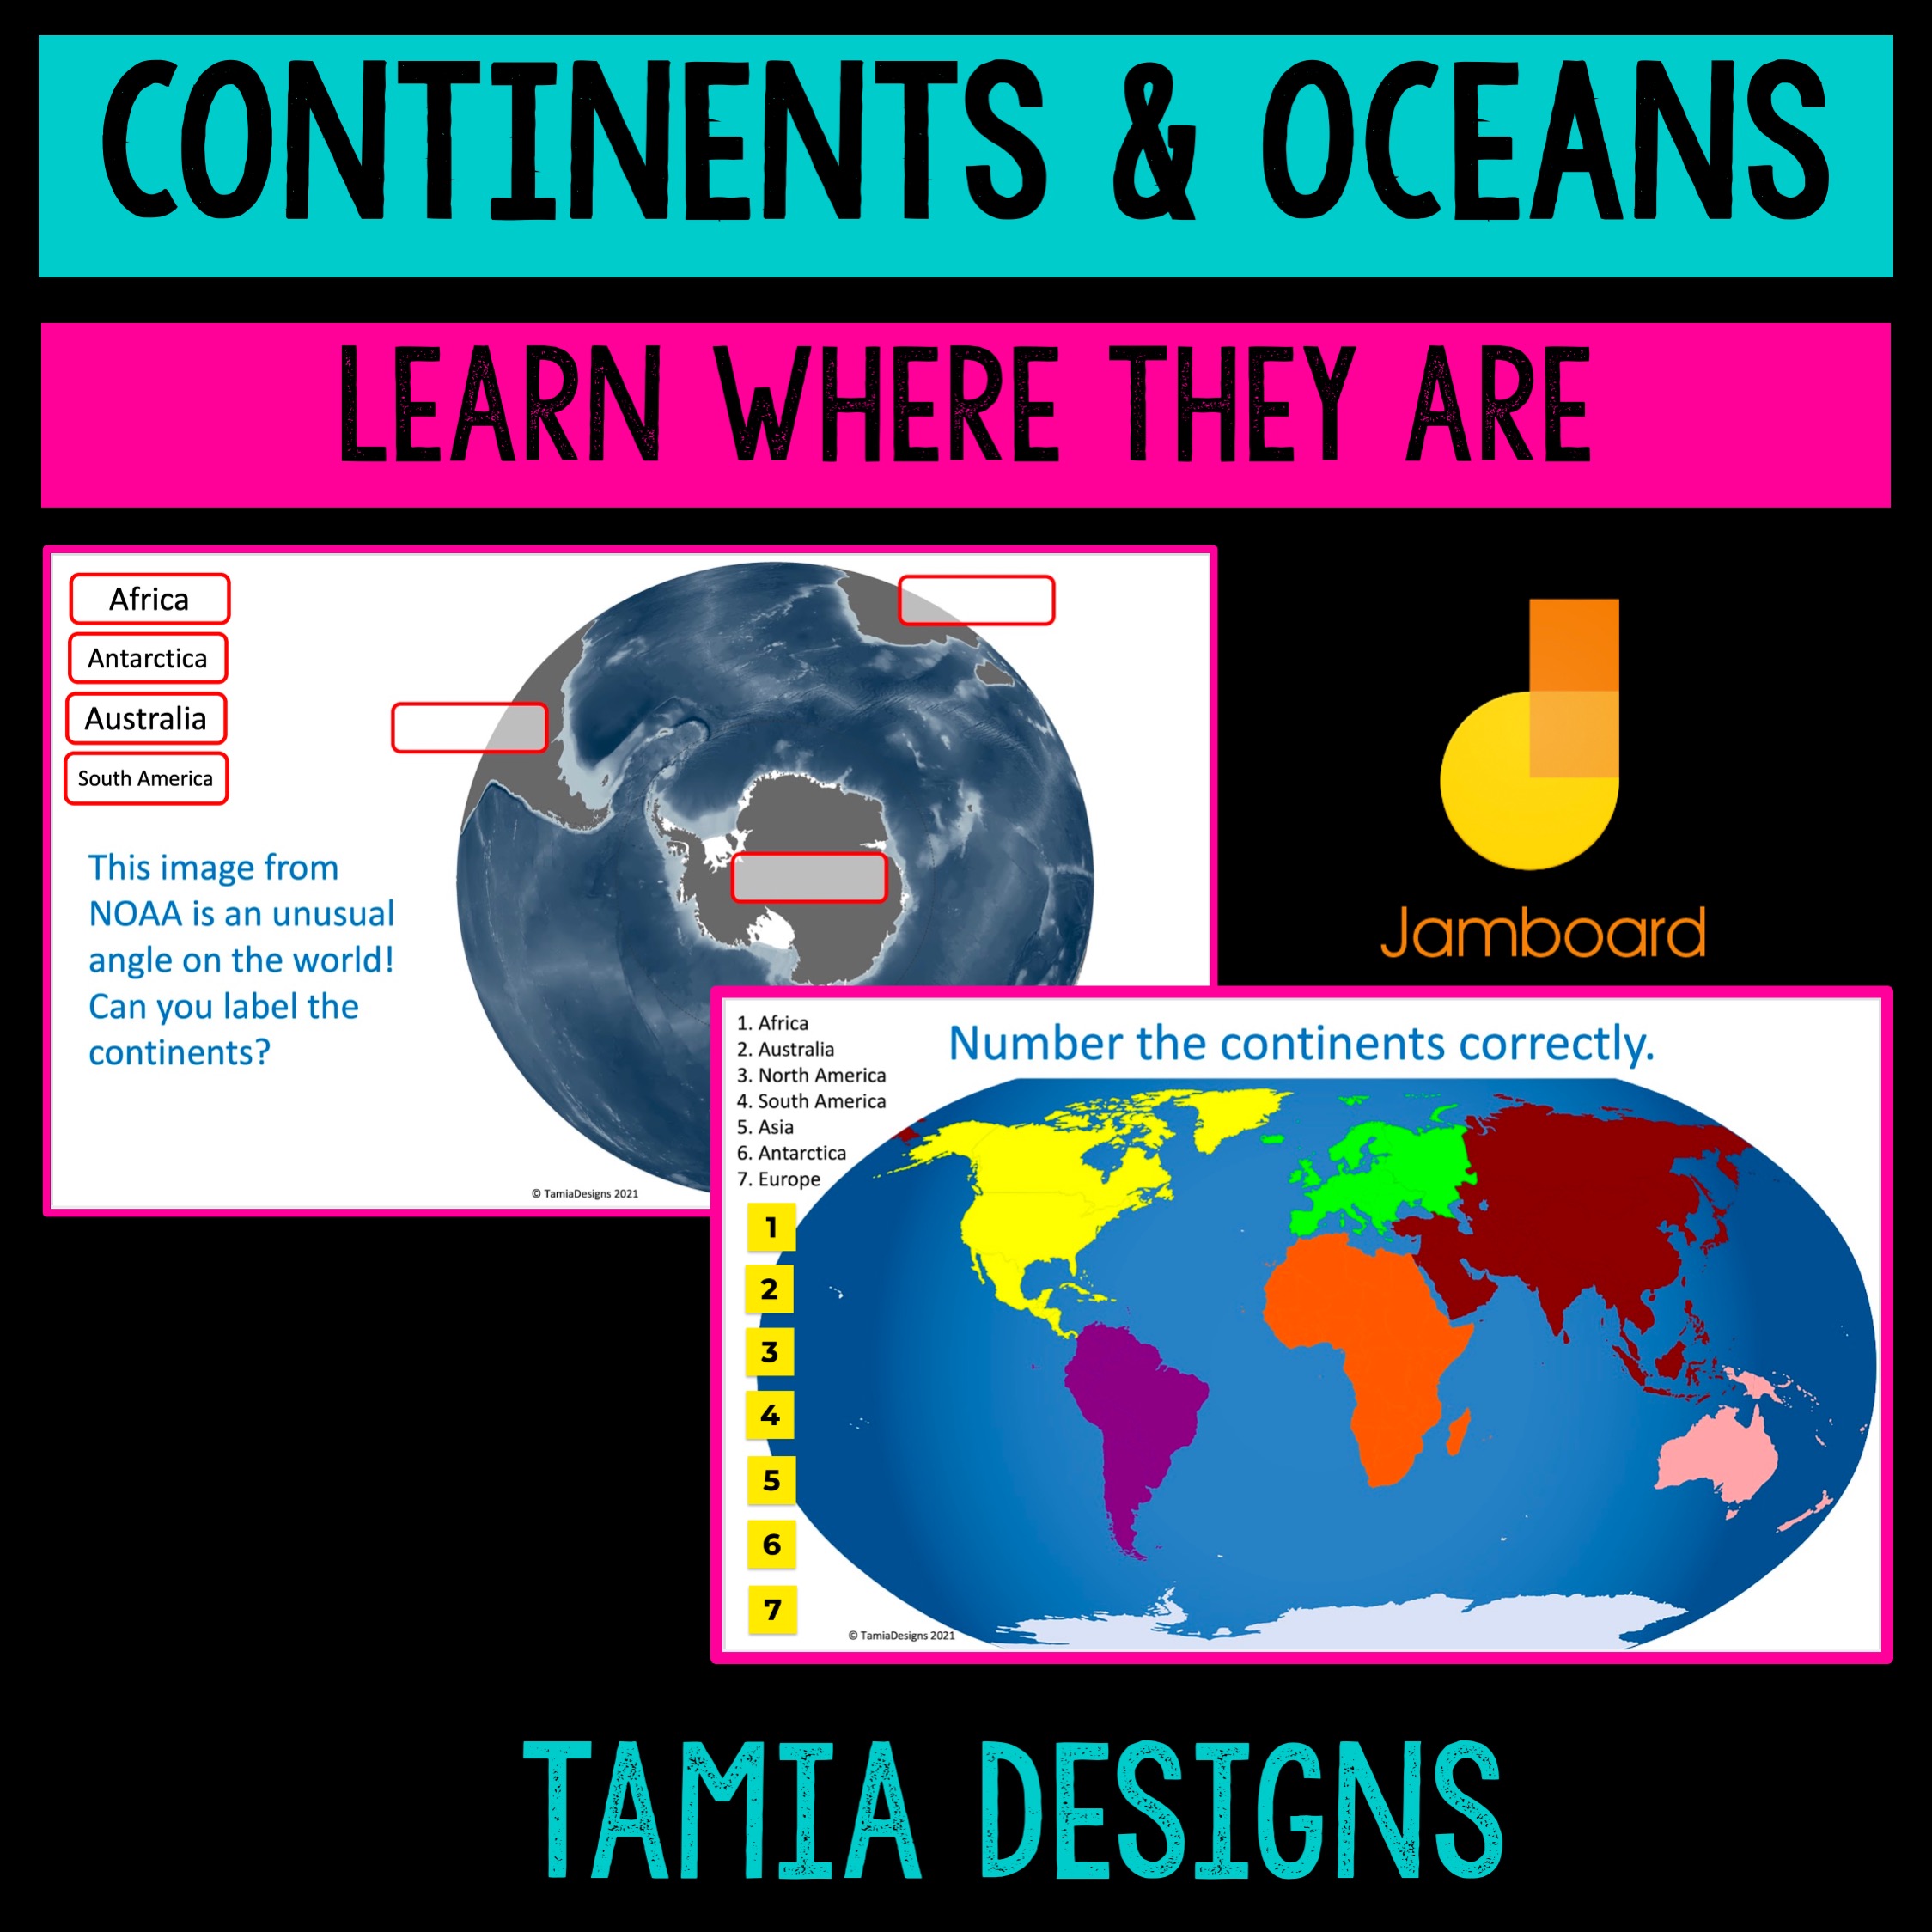 Continents and Oceans Jamboard interactive activity's featured image